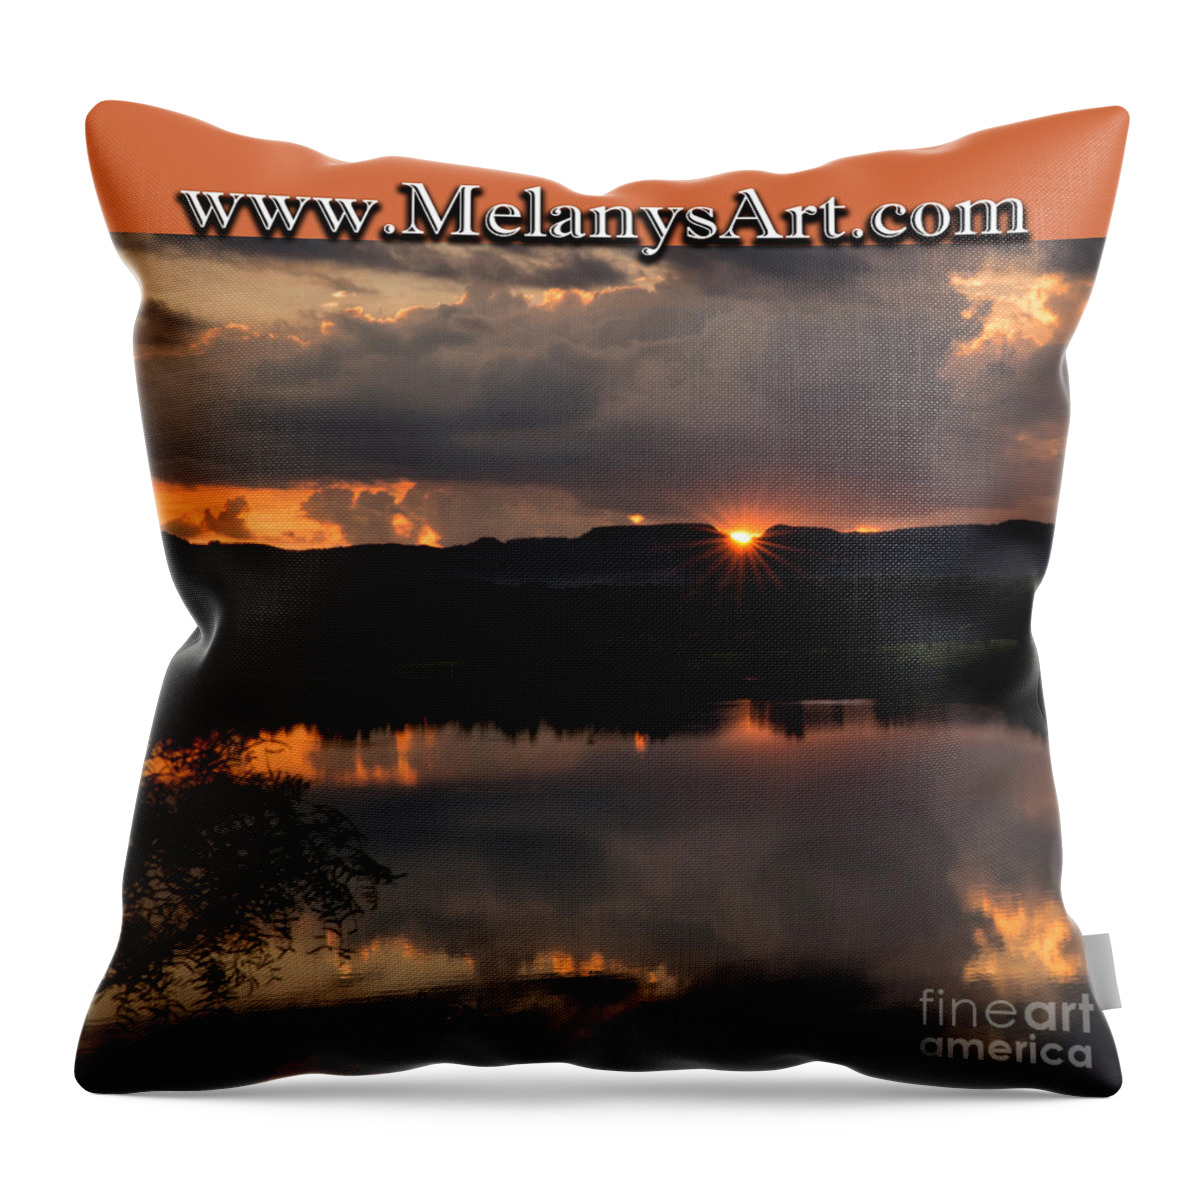  Throw Pillow featuring the photograph Sunset Reflection by Melany Sarafis